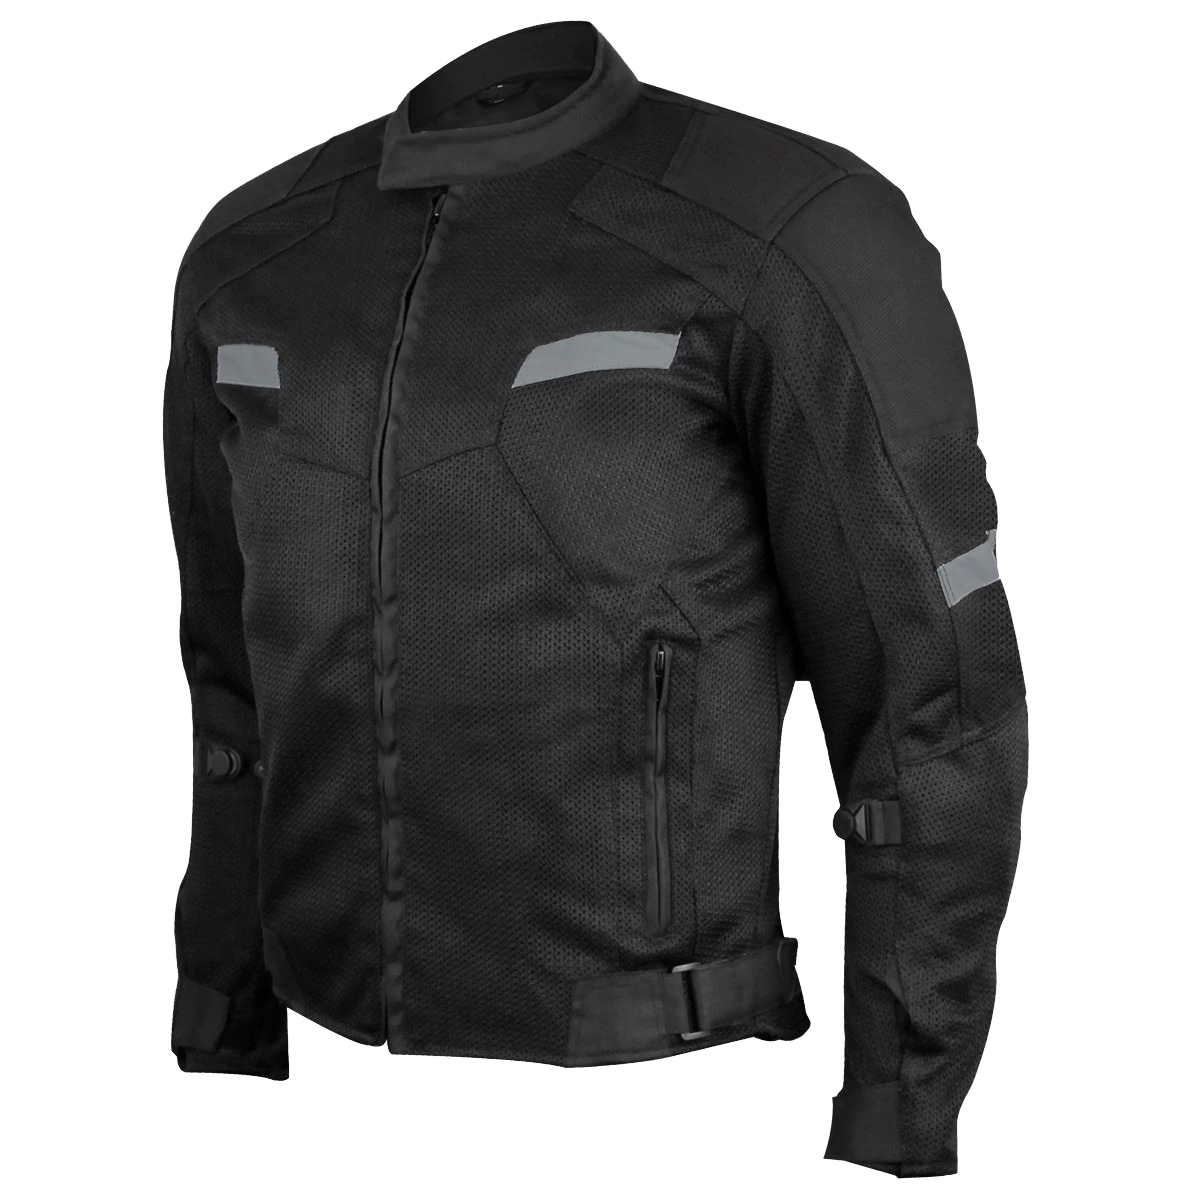 Black Mesh Motorcycle Jacket with Insulated Liner and CE Armor